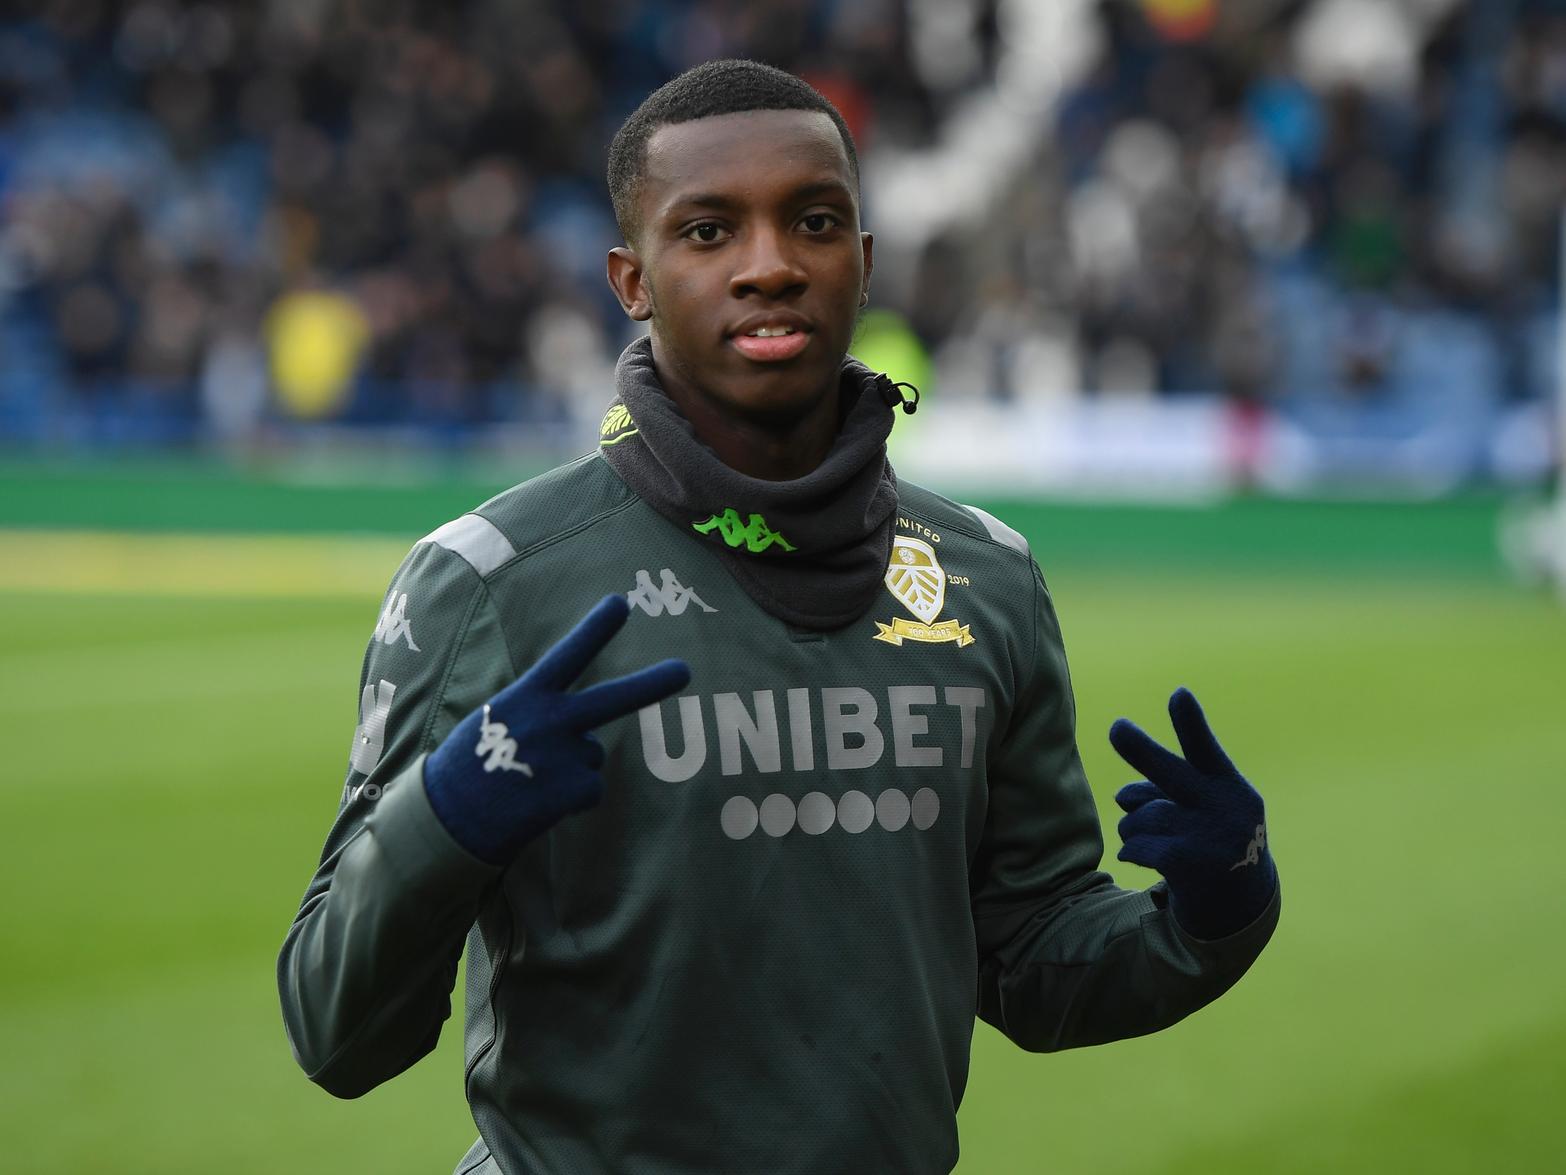 Bristol City look set to complete the loan signing of Arsenal's Eddie Nketiah - a target of Sheffield Wednesday - as they look to find the firepower necessary to boost their push for a play-off place. (Bristol Post)